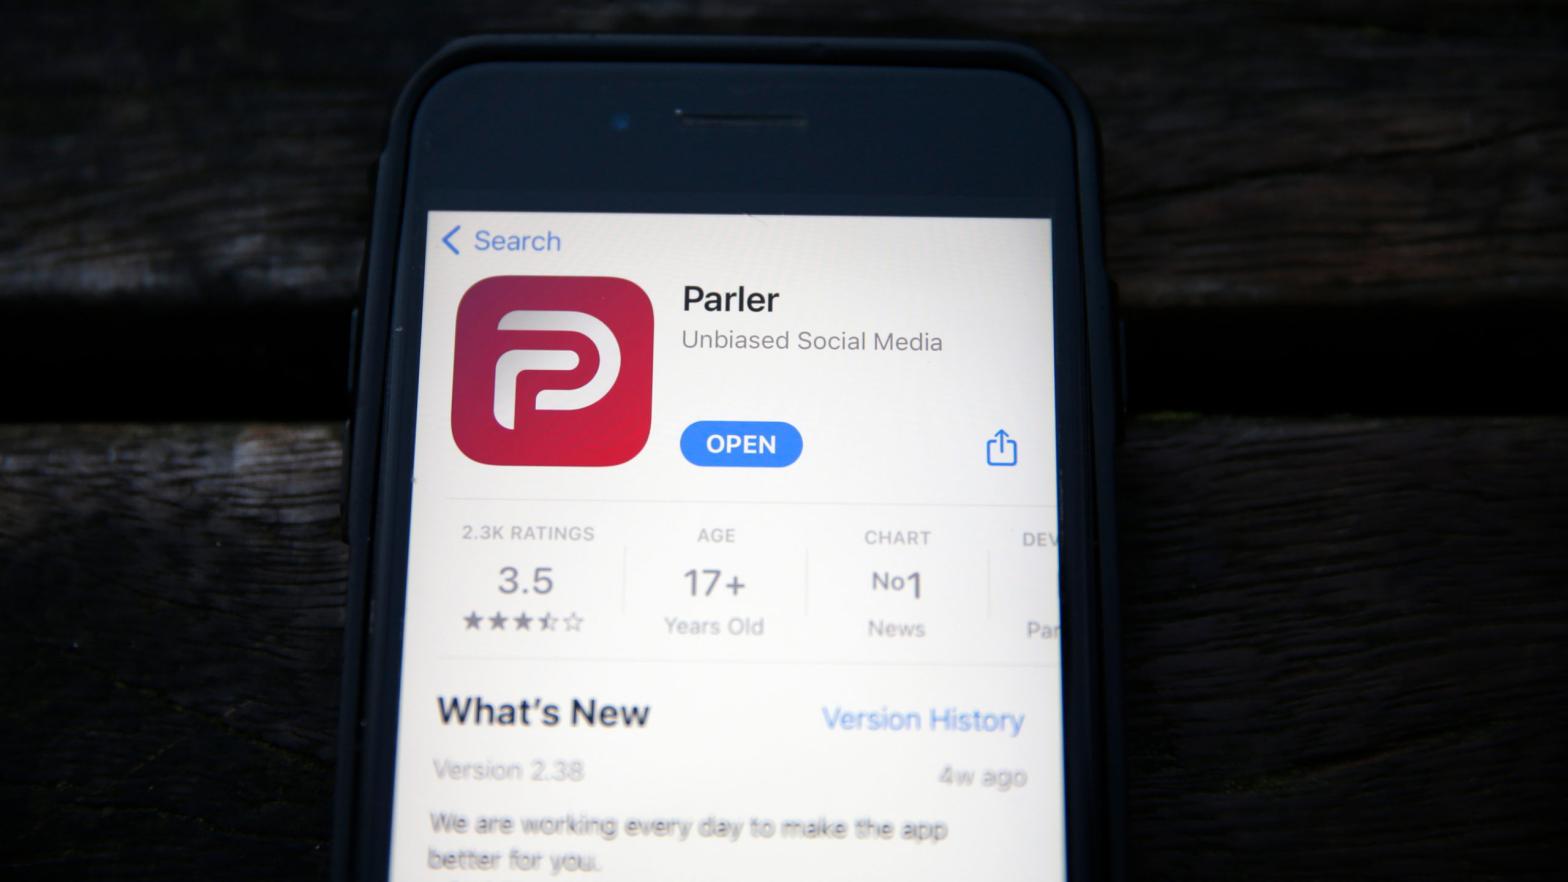 The Parler App running on an iPhone. (Photo: Hollie Adams, Getty Images)